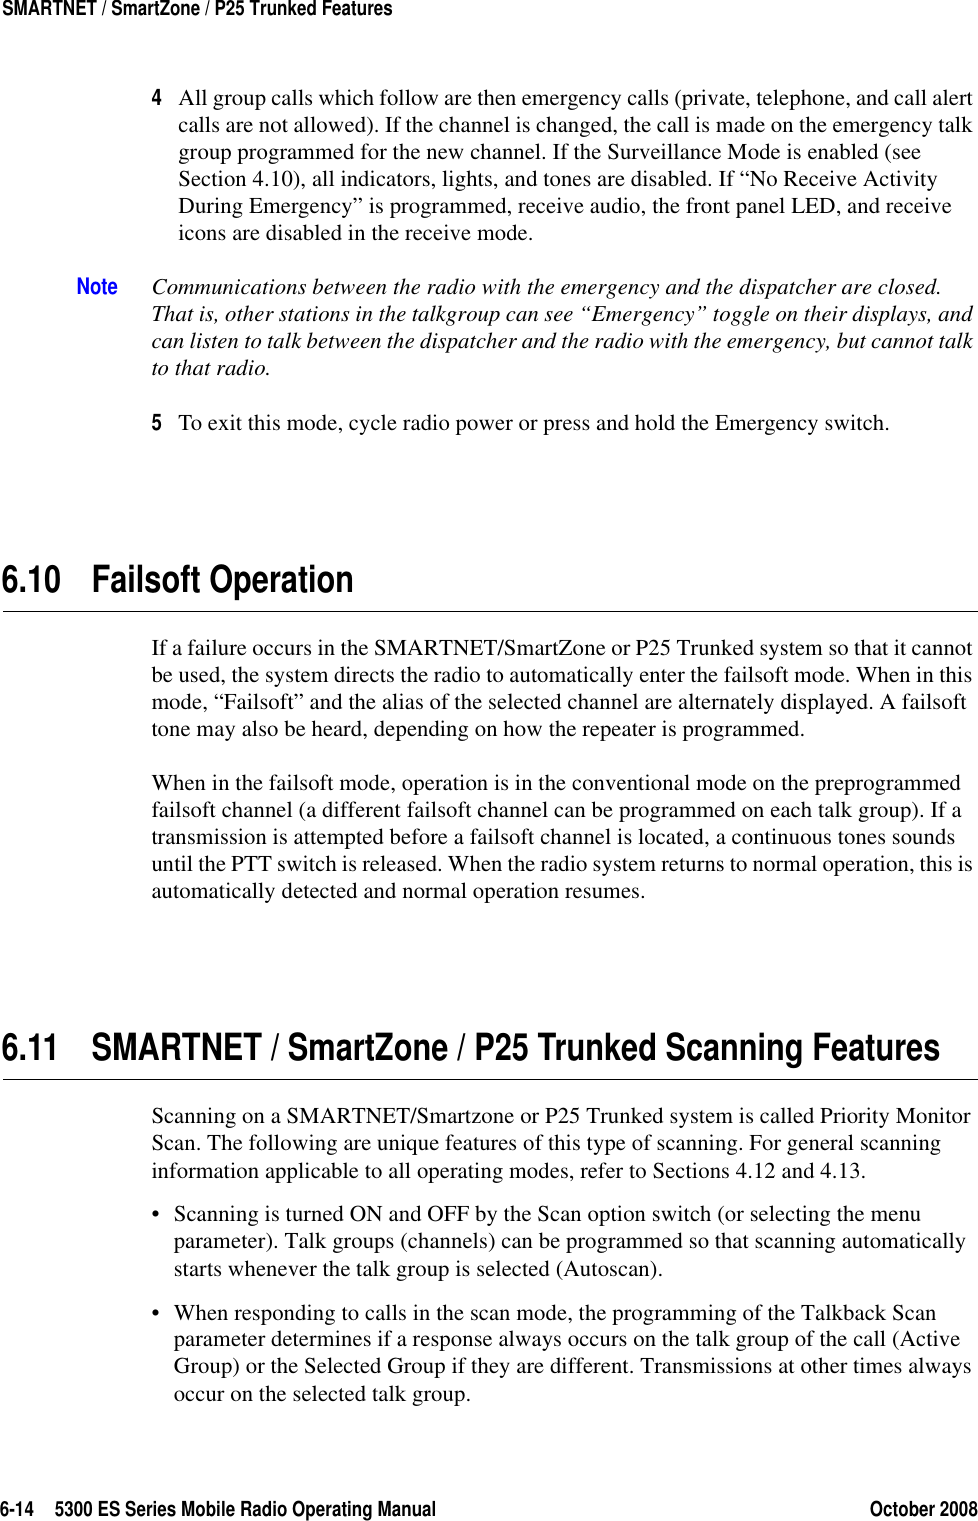 6-14 5300 ES Series Mobile Radio Operating Manual October 2008SMARTNET / SmartZone / P25 Trunked Features4All group calls which follow are then emergency calls (private, telephone, and call alert calls are not allowed). If the channel is changed, the call is made on the emergency talk group programmed for the new channel. If the Surveillance Mode is enabled (see Section 4.10), all indicators, lights, and tones are disabled. If “No Receive Activity During Emergency” is programmed, receive audio, the front panel LED, and receive icons are disabled in the receive mode.Note Communications between the radio with the emergency and the dispatcher are closed. That is, other stations in the talkgroup can see “Emergency” toggle on their displays, and can listen to talk between the dispatcher and the radio with the emergency, but cannot talk to that radio.5To exit this mode, cycle radio power or press and hold the Emergency switch.6.10 Failsoft OperationIf a failure occurs in the SMARTNET/SmartZone or P25 Trunked system so that it cannot be used, the system directs the radio to automatically enter the failsoft mode. When in this mode, “Failsoft” and the alias of the selected channel are alternately displayed. A failsoft tone may also be heard, depending on how the repeater is programmed.When in the failsoft mode, operation is in the conventional mode on the preprogrammed failsoft channel (a different failsoft channel can be programmed on each talk group). If a transmission is attempted before a failsoft channel is located, a continuous tones sounds until the PTT switch is released. When the radio system returns to normal operation, this is automatically detected and normal operation resumes.6.11 SMARTNET / SmartZone / P25 Trunked Scanning FeaturesScanning on a SMARTNET/Smartzone or P25 Trunked system is called Priority Monitor Scan. The following are unique features of this type of scanning. For general scanning information applicable to all operating modes, refer to Sections 4.12 and 4.13.• Scanning is turned ON and OFF by the Scan option switch (or selecting the menu parameter). Talk groups (channels) can be programmed so that scanning automatically starts whenever the talk group is selected (Autoscan).• When responding to calls in the scan mode, the programming of the Talkback Scan parameter determines if a response always occurs on the talk group of the call (Active Group) or the Selected Group if they are different. Transmissions at other times always occur on the selected talk group.